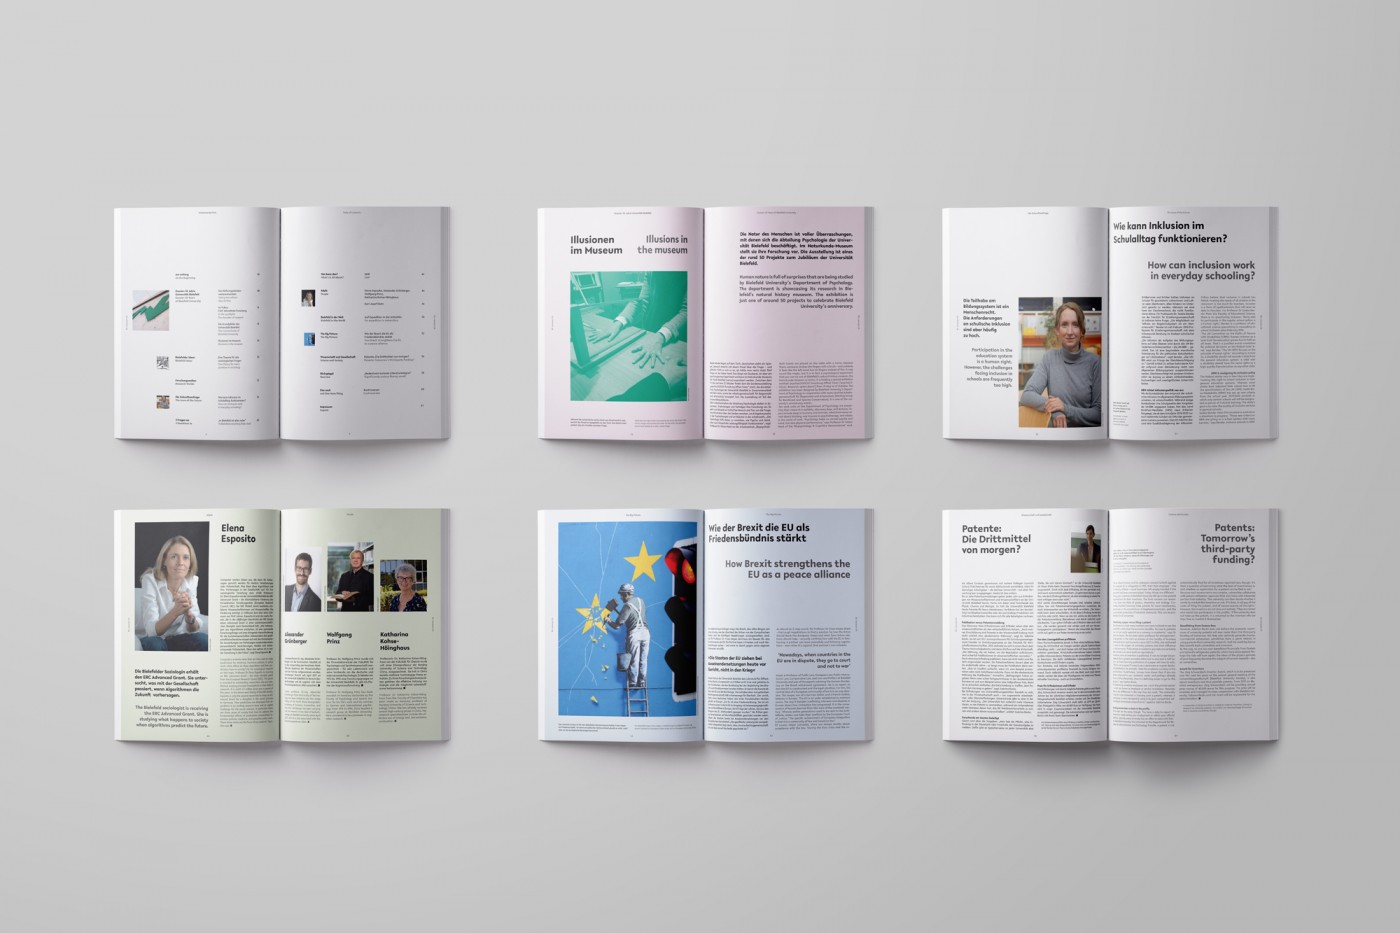 Six doubles spreads of the magazine, featuring the table of content and five intro spreads.